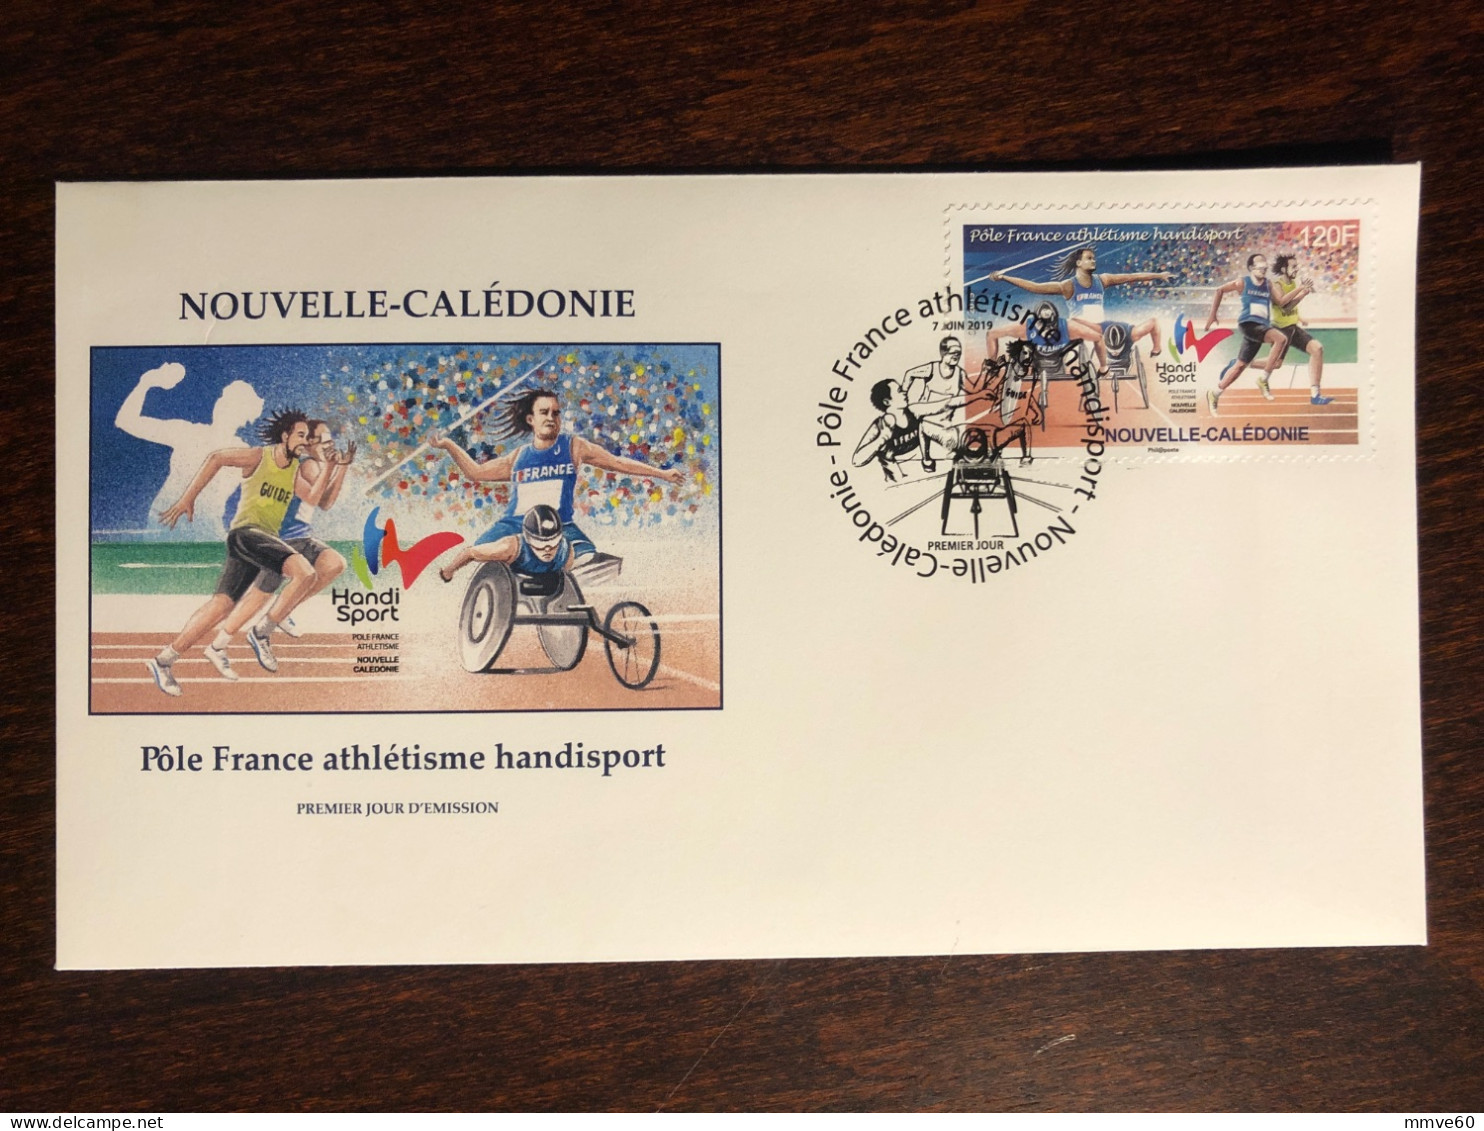 NEW CALEDONIA NOUVELLE CALEDONIE FDC COVER 2019 YEAR DISABLED IN SPORT PARALYMPICS HEALTH MEDICINE - Lettres & Documents